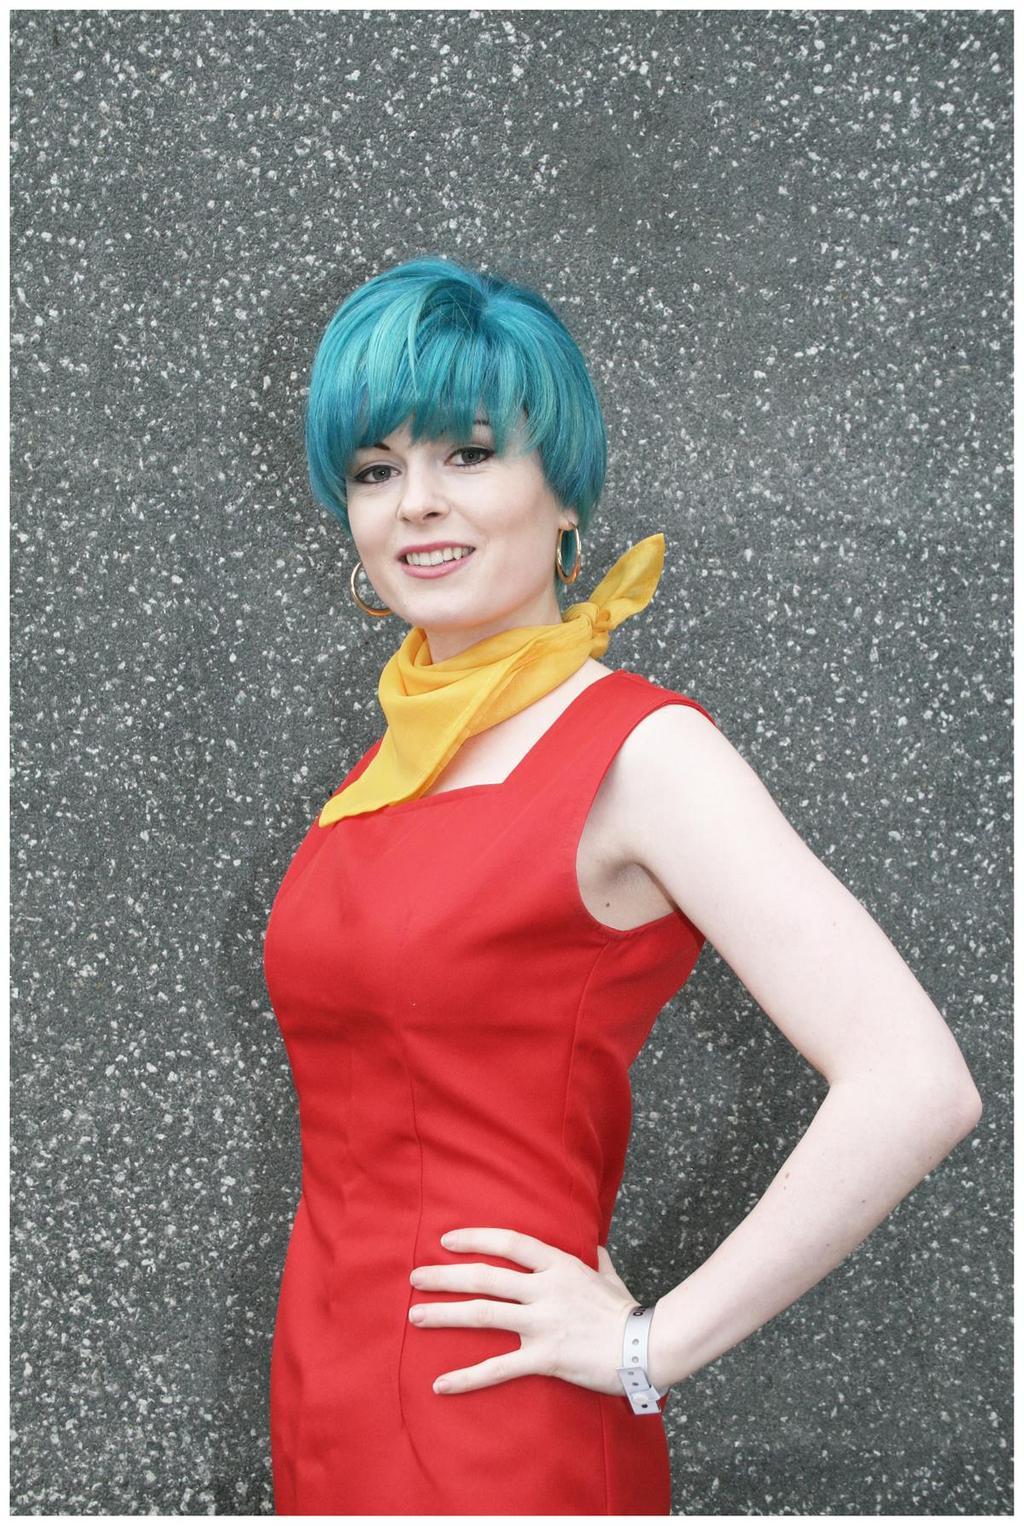 70+ Hot Pictures Of Bulma From Dragon Ball Z Are Sure To Get Your Heart Thumping Fast 182